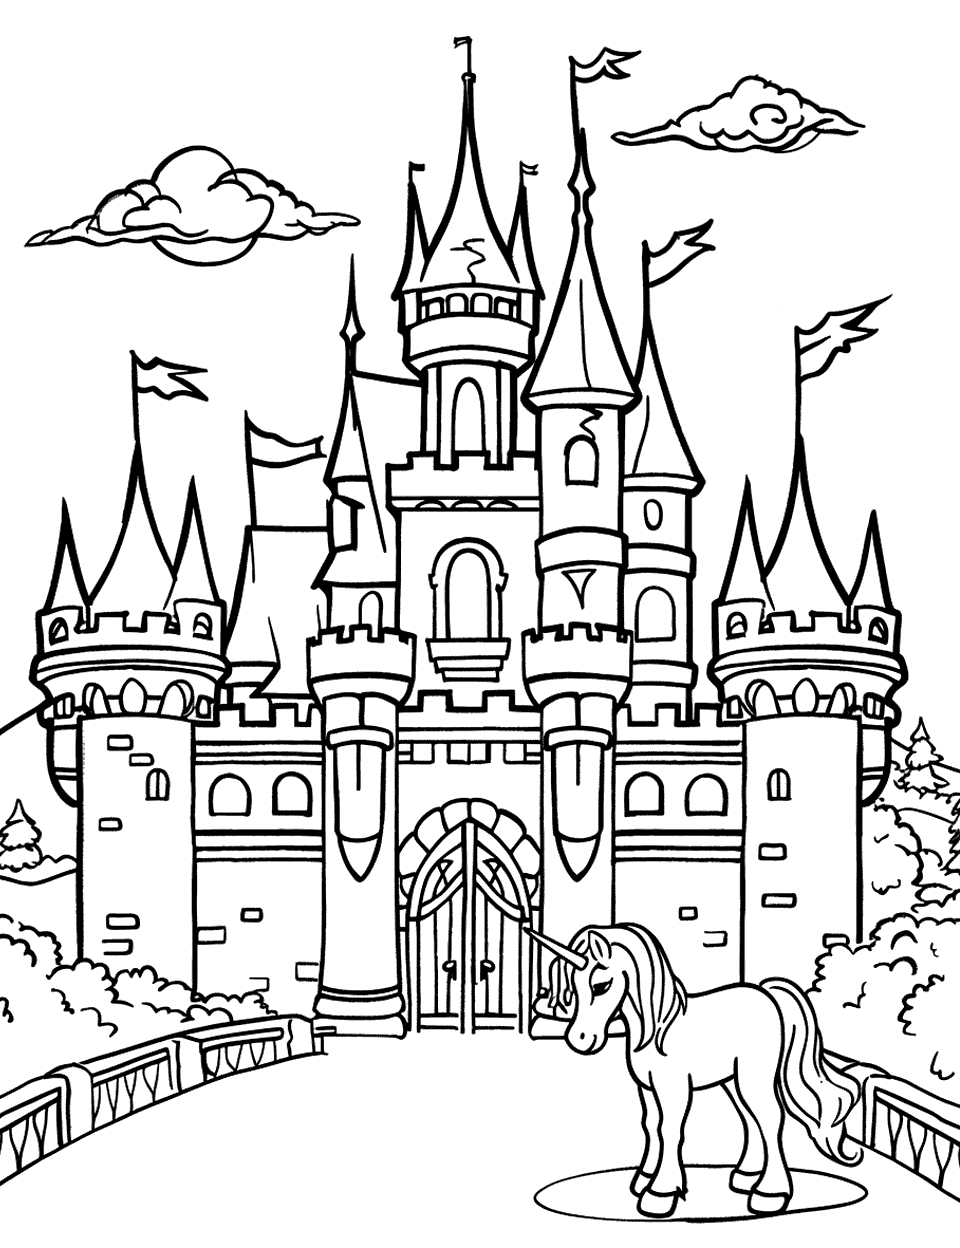 Fairytale Castle and Unicorn Coloring Page - A magical castle with a single unicorn grazing in the foreground.